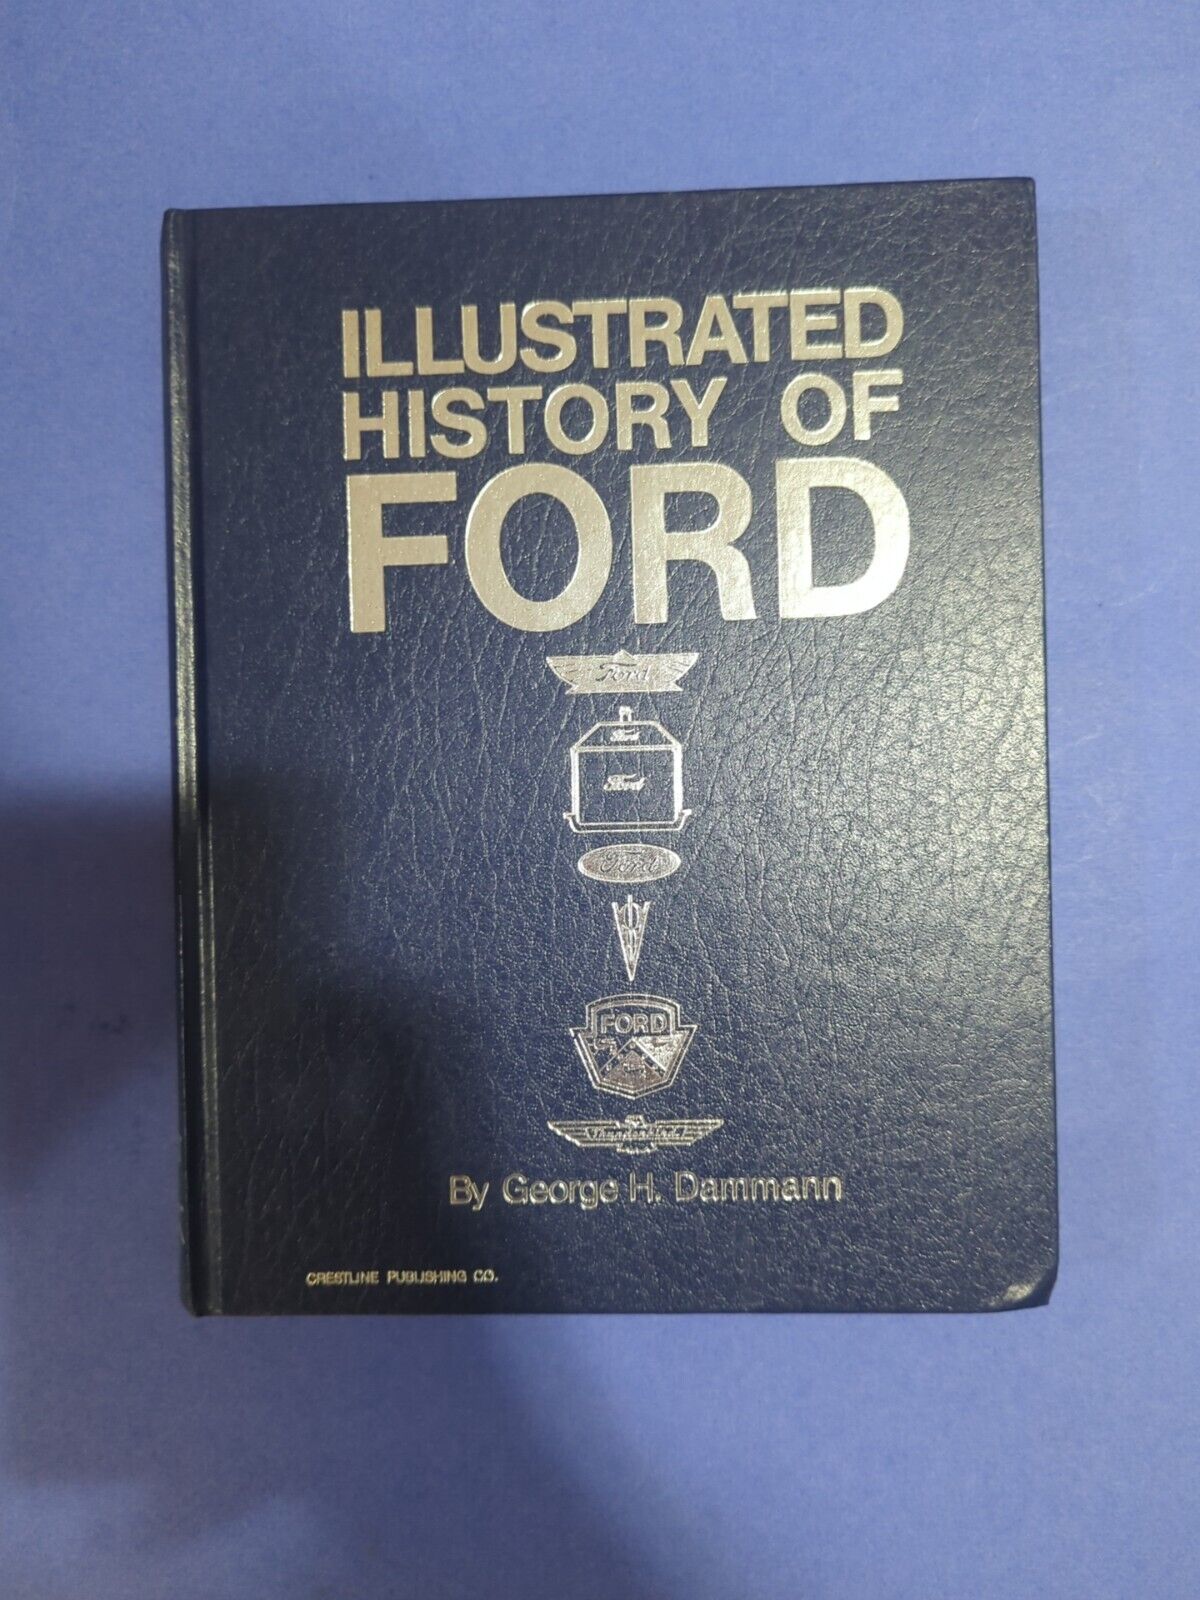 Vintage Illustrated History Of Ford By George Daamann Book 1903-1970 Revised (A1